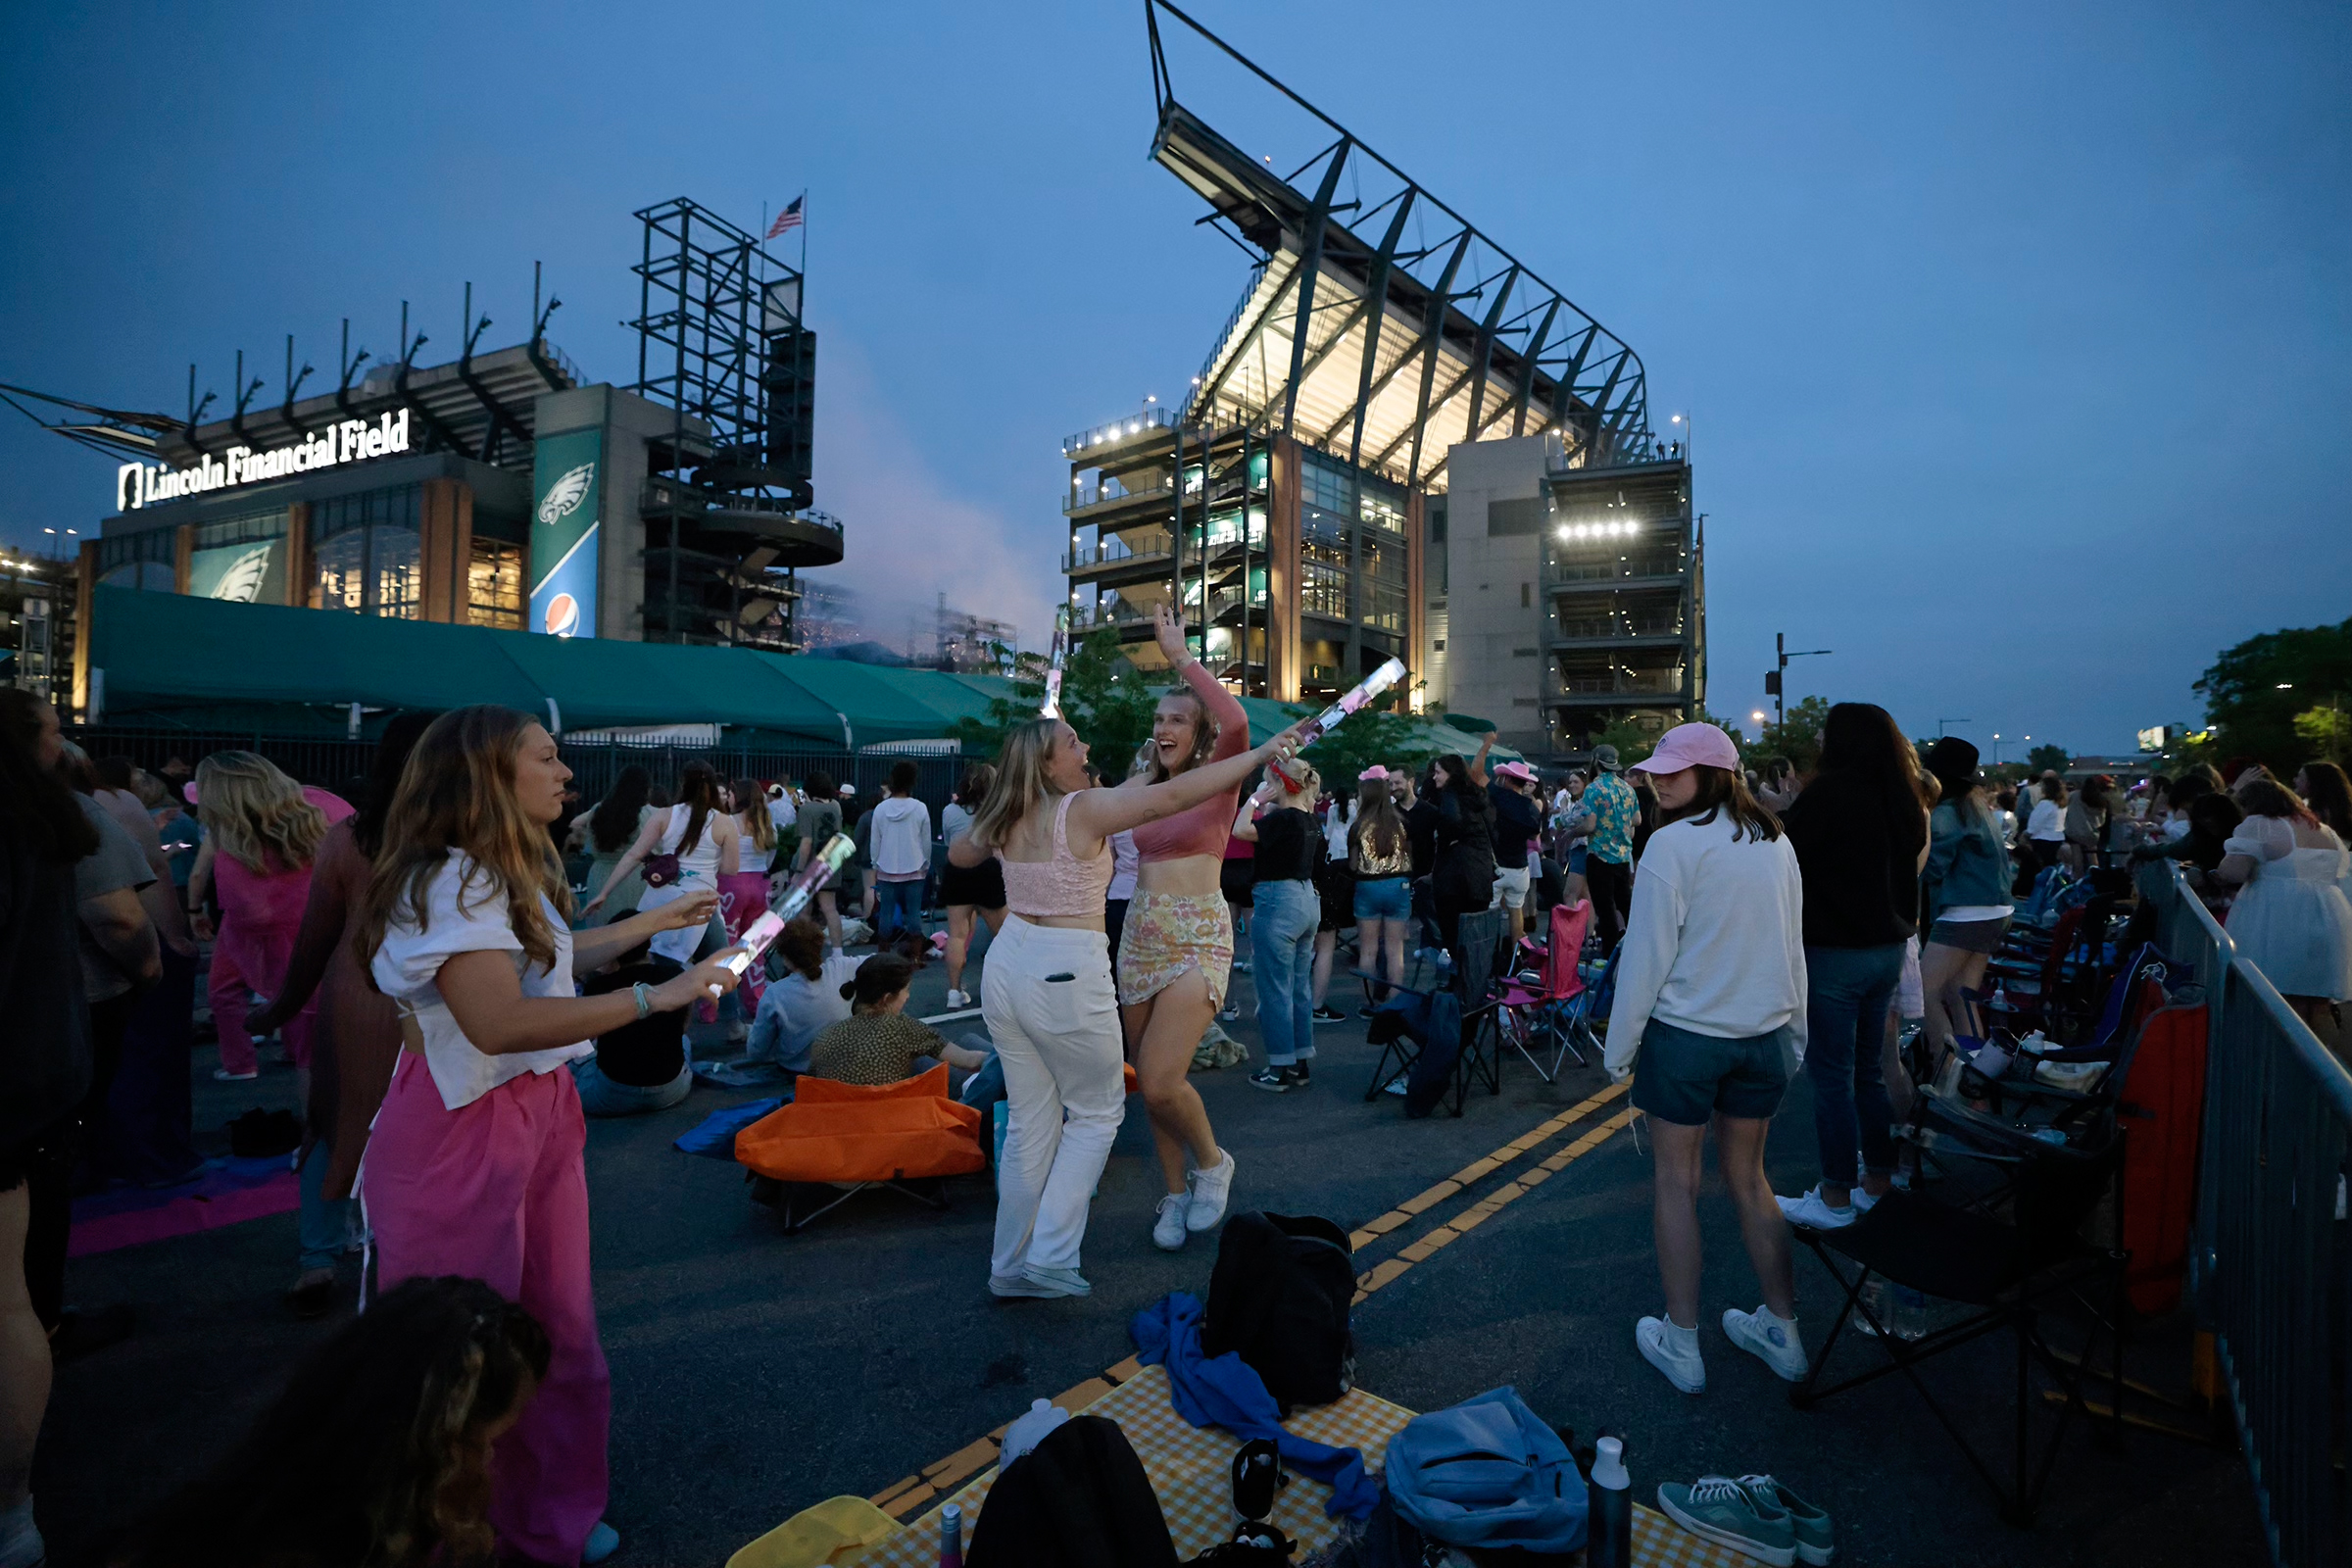 Taylor Swift dance parties: A booming business in Philadelphia